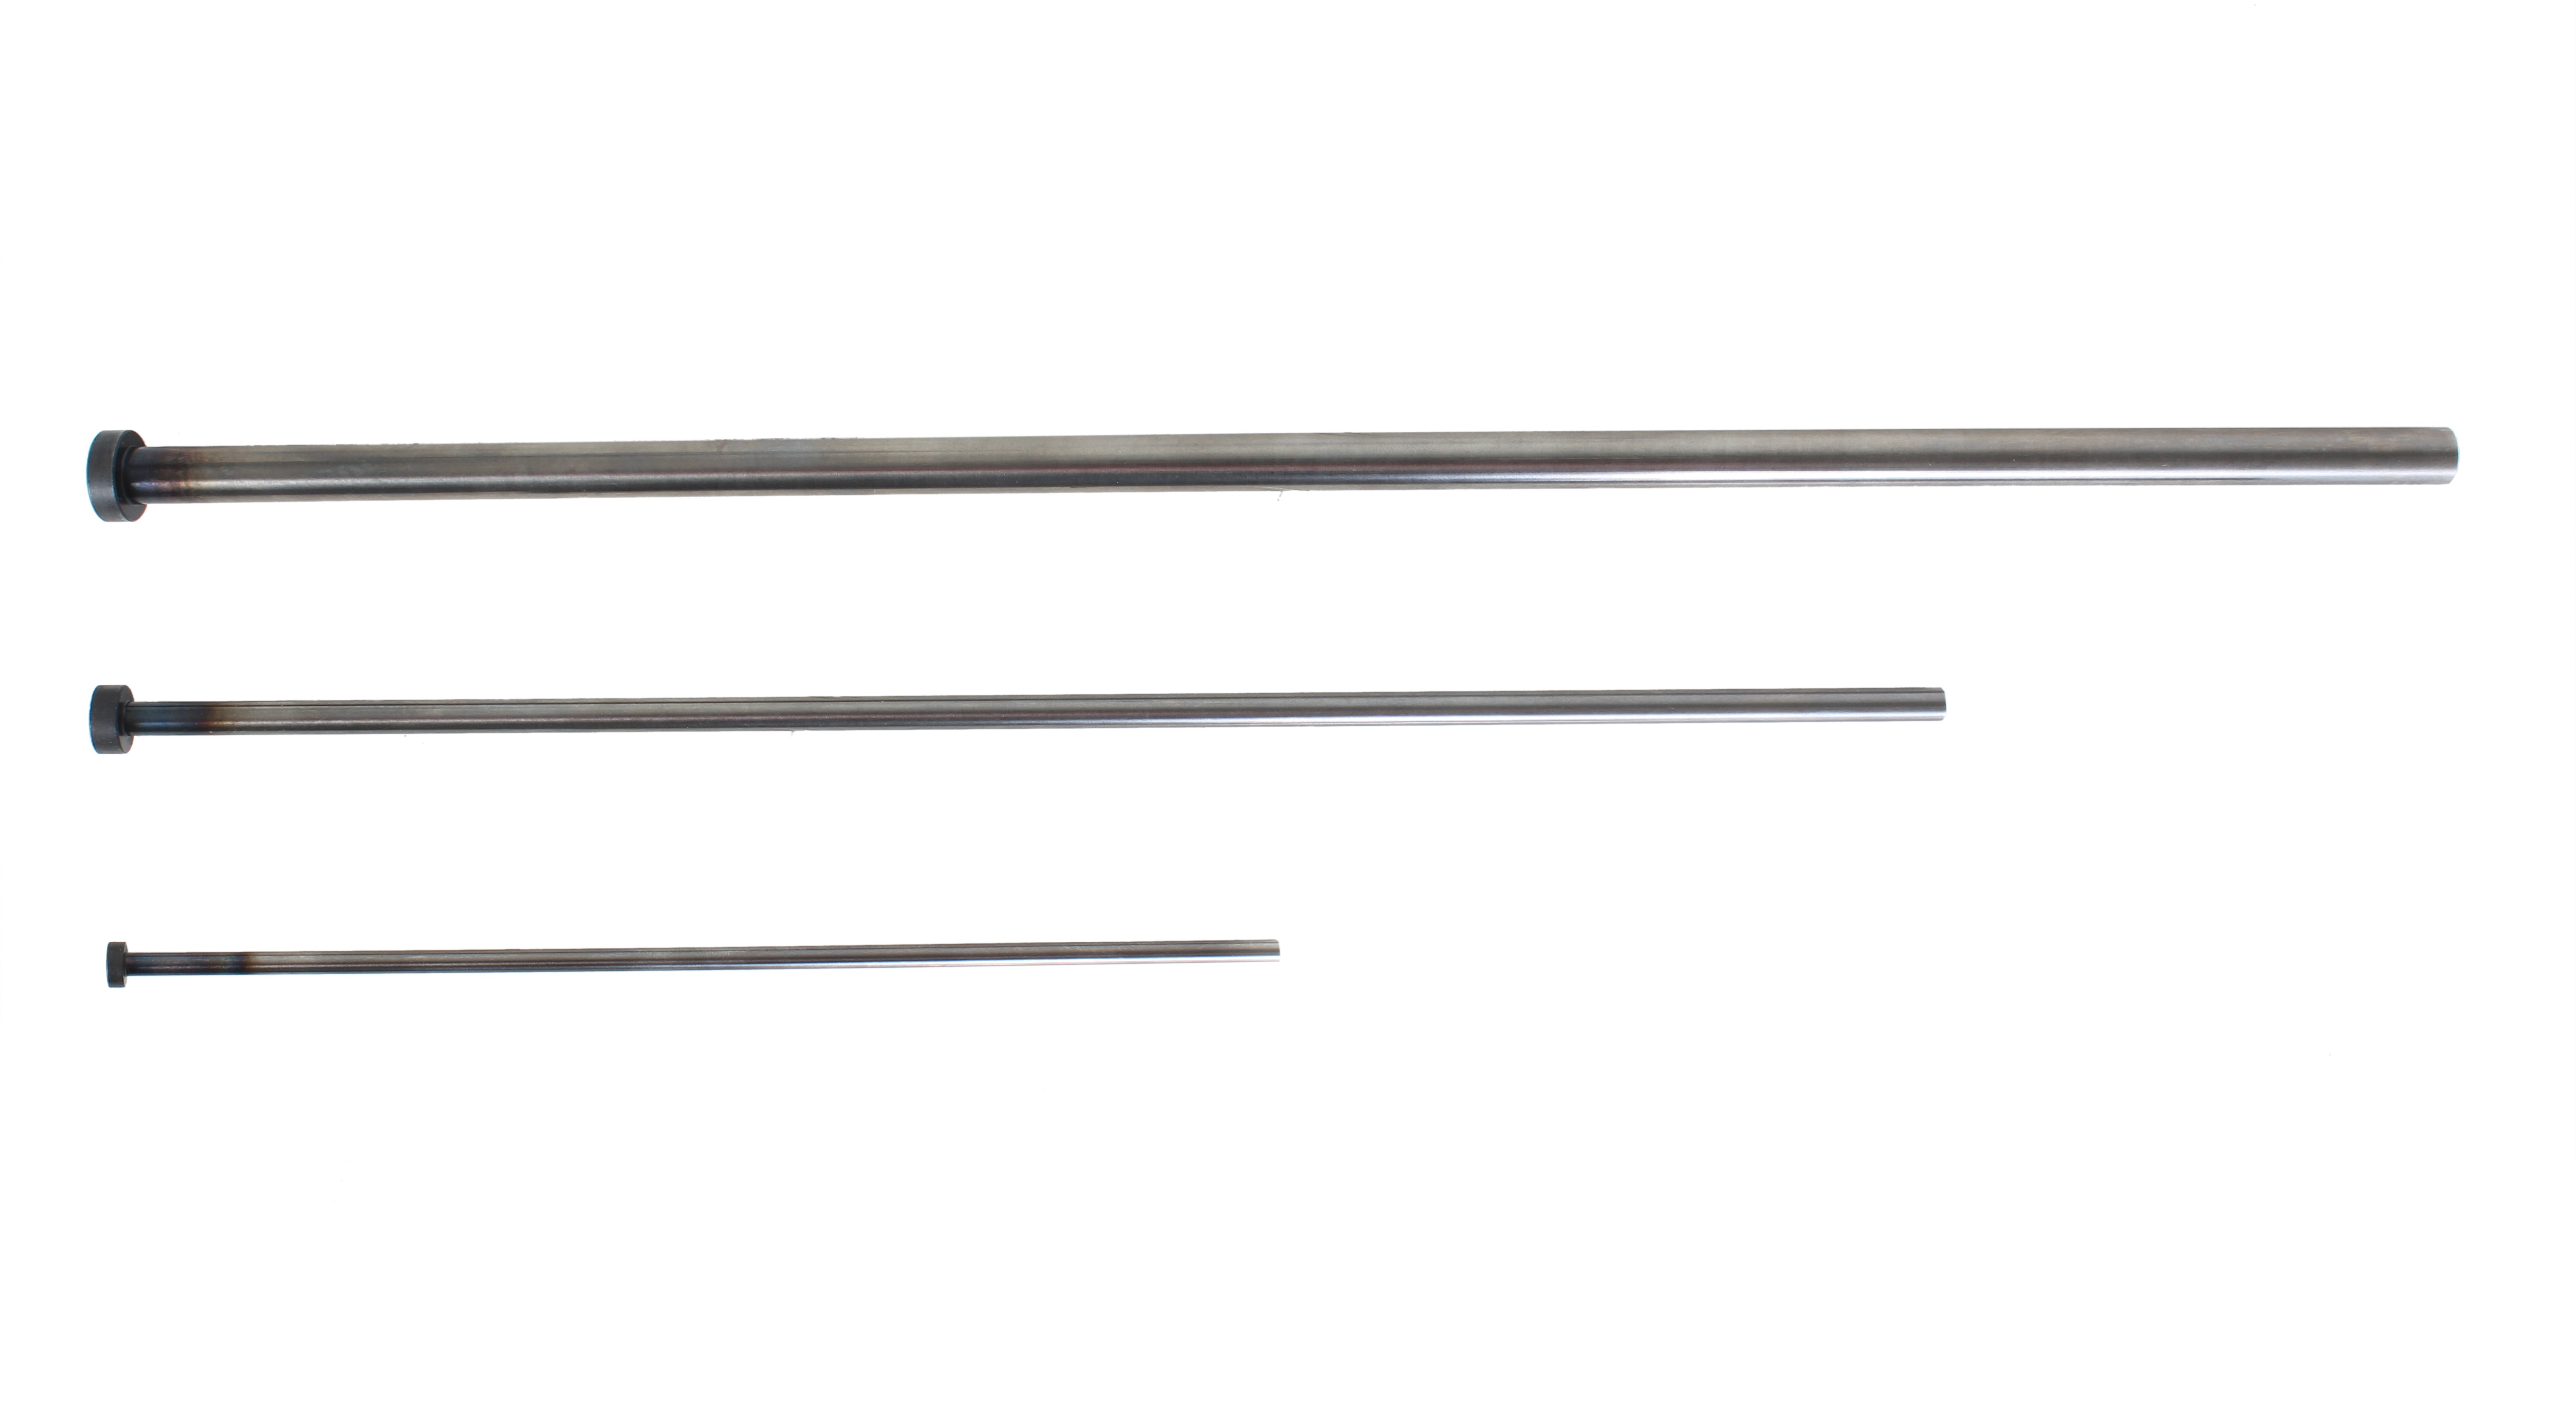 STRAIGHT EJECTOR PINS -DIN Type/SKD61 equivalent+Nitrided/Standard- (D-EPN8-200) 